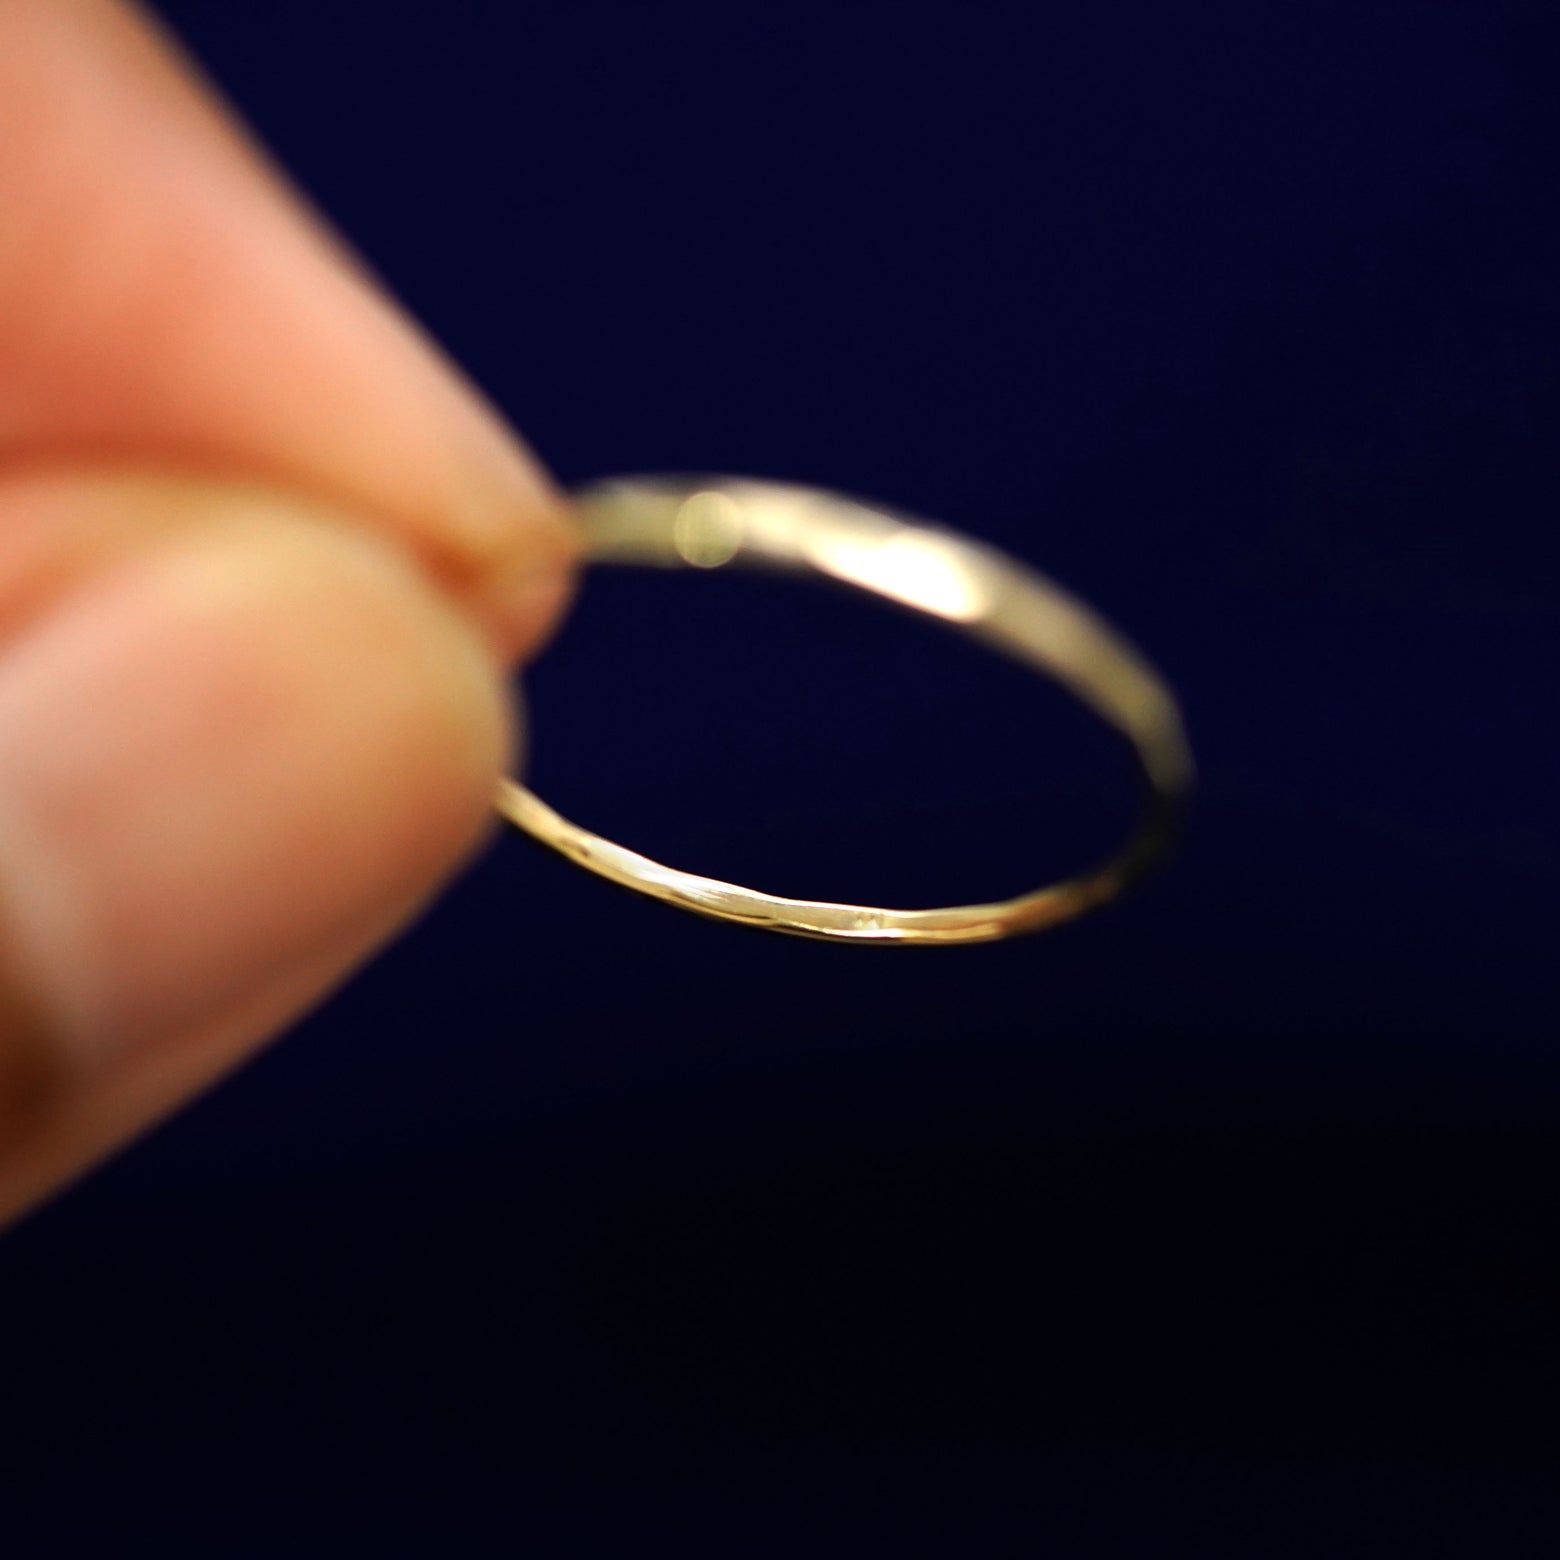 Underside view of a solid 14k gold Hammered Ring